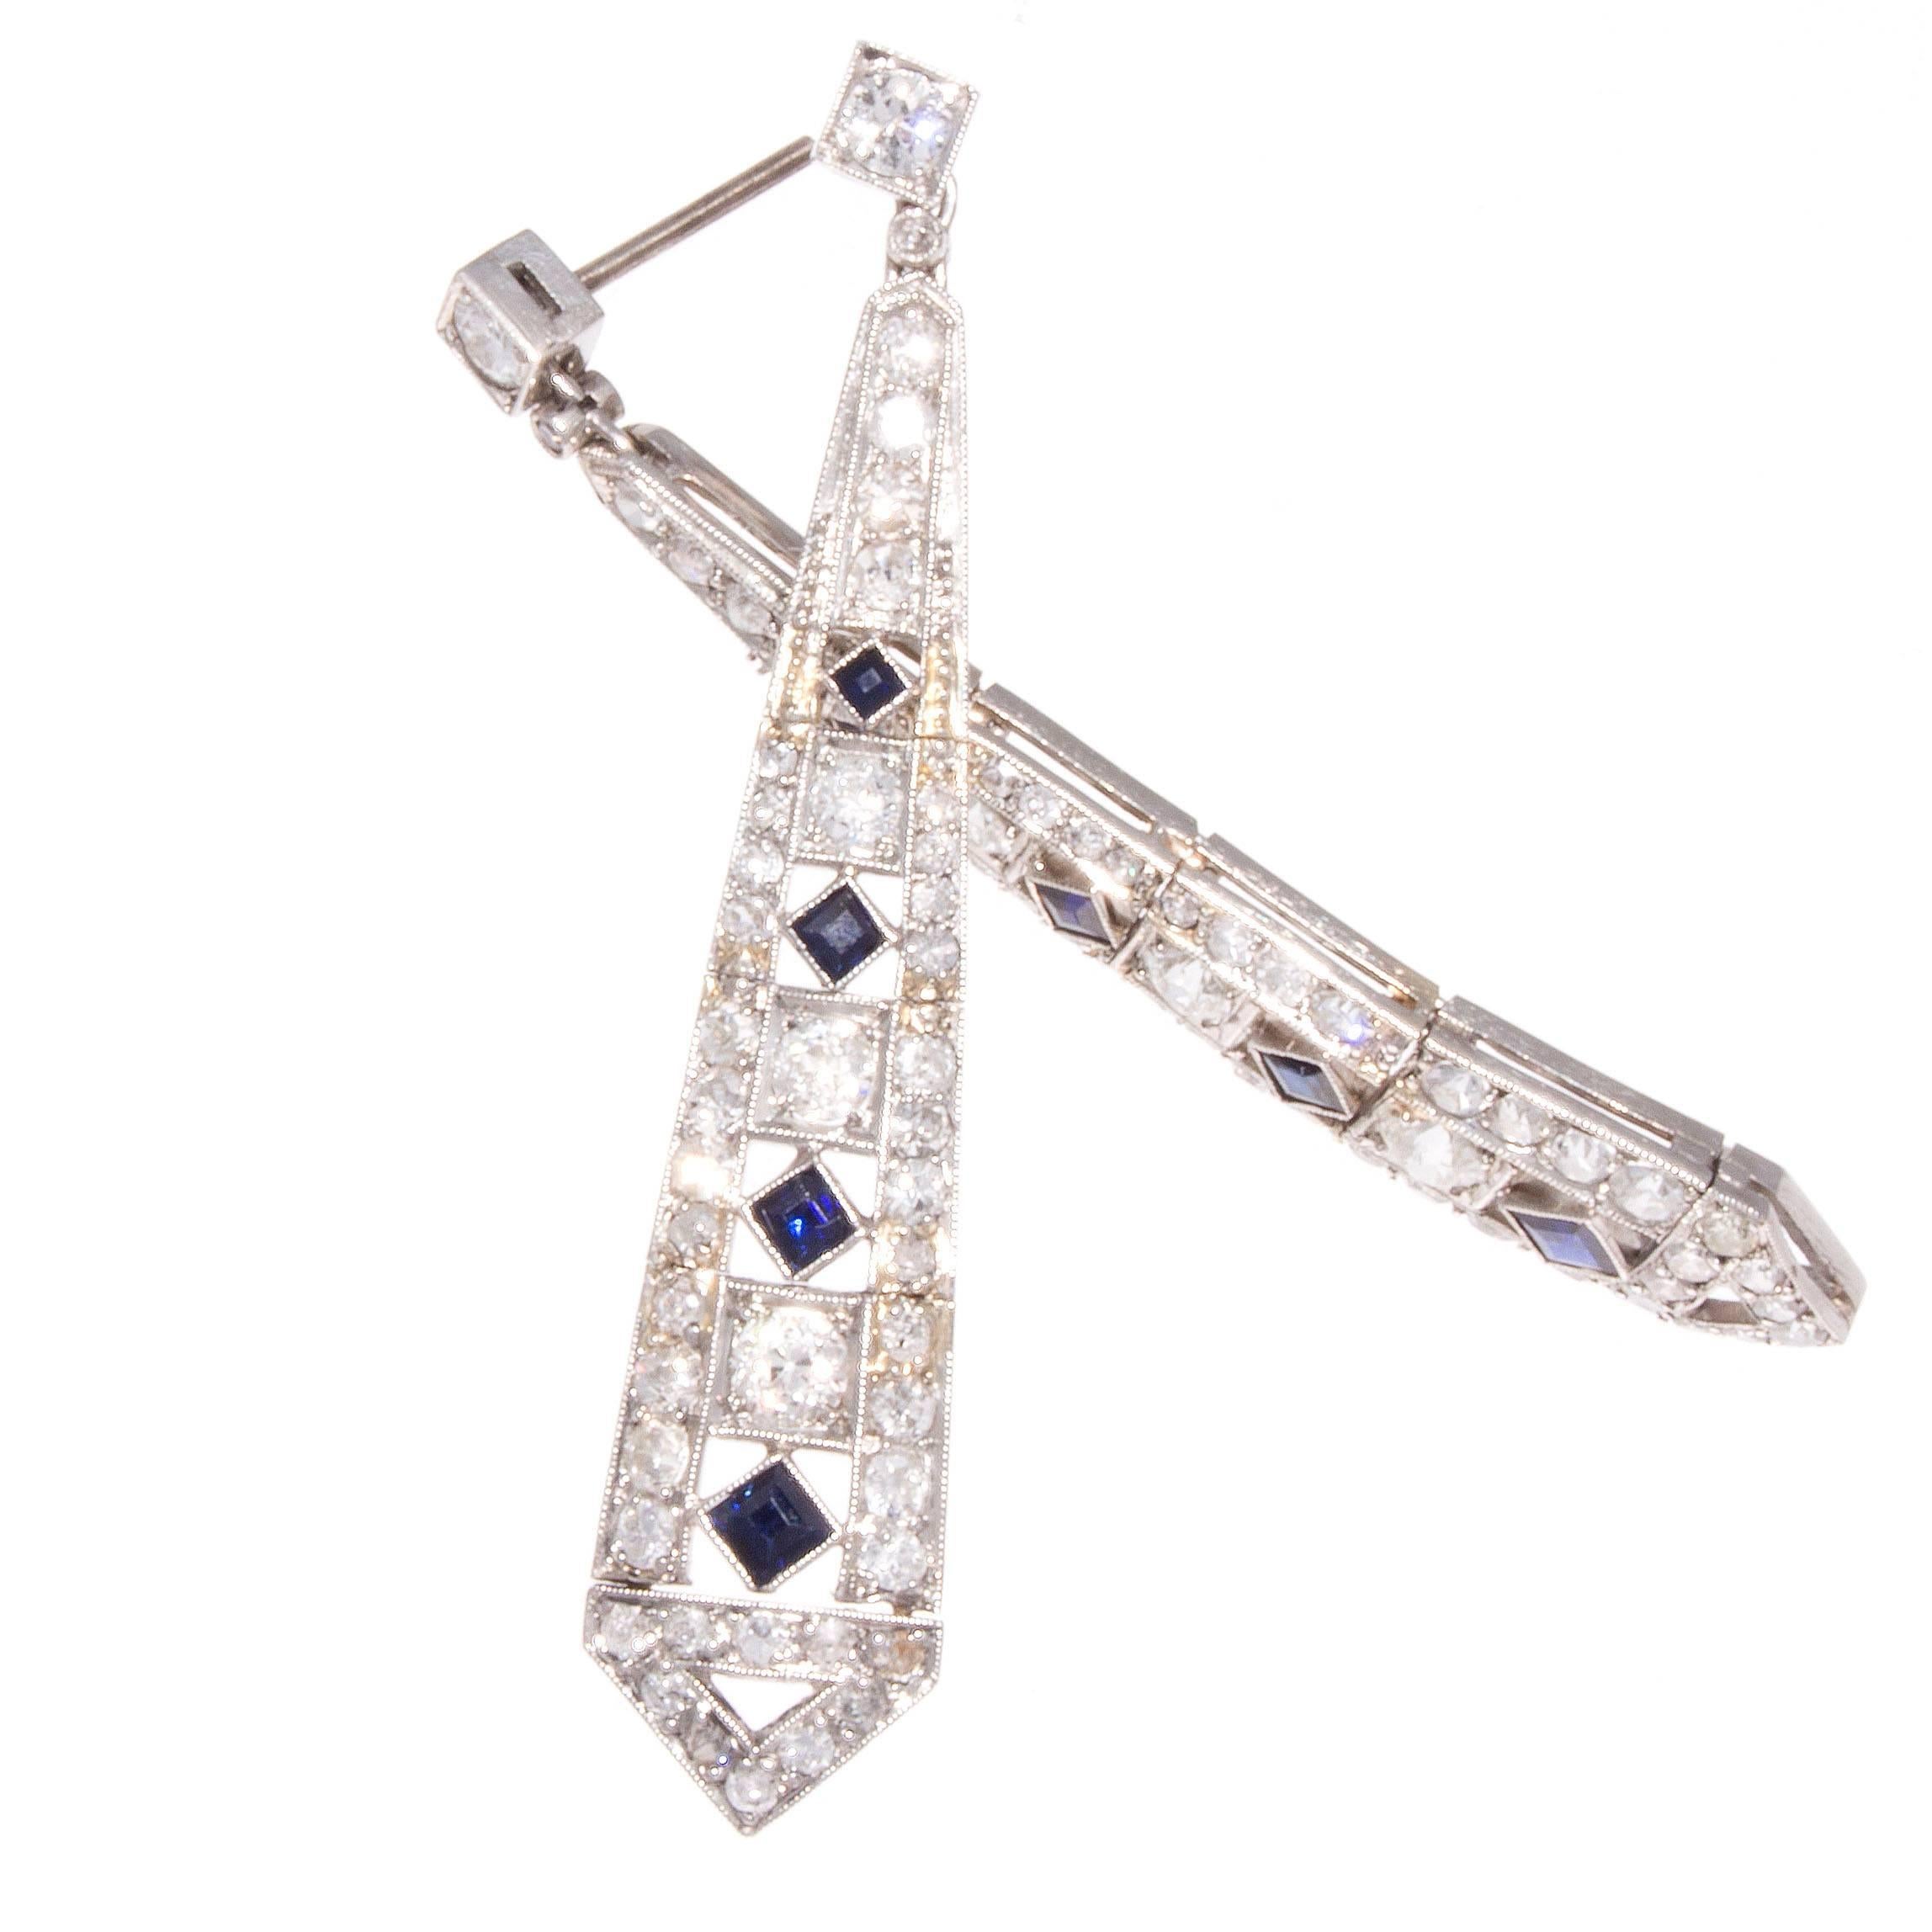 An outstanding creation true to the art deco period. Designed in a classic geometric architectural style. With white, clean diamonds cascading down the hand crafted platinum earrings and strategically placed vibrant blue sapphires. 

2 inches long.